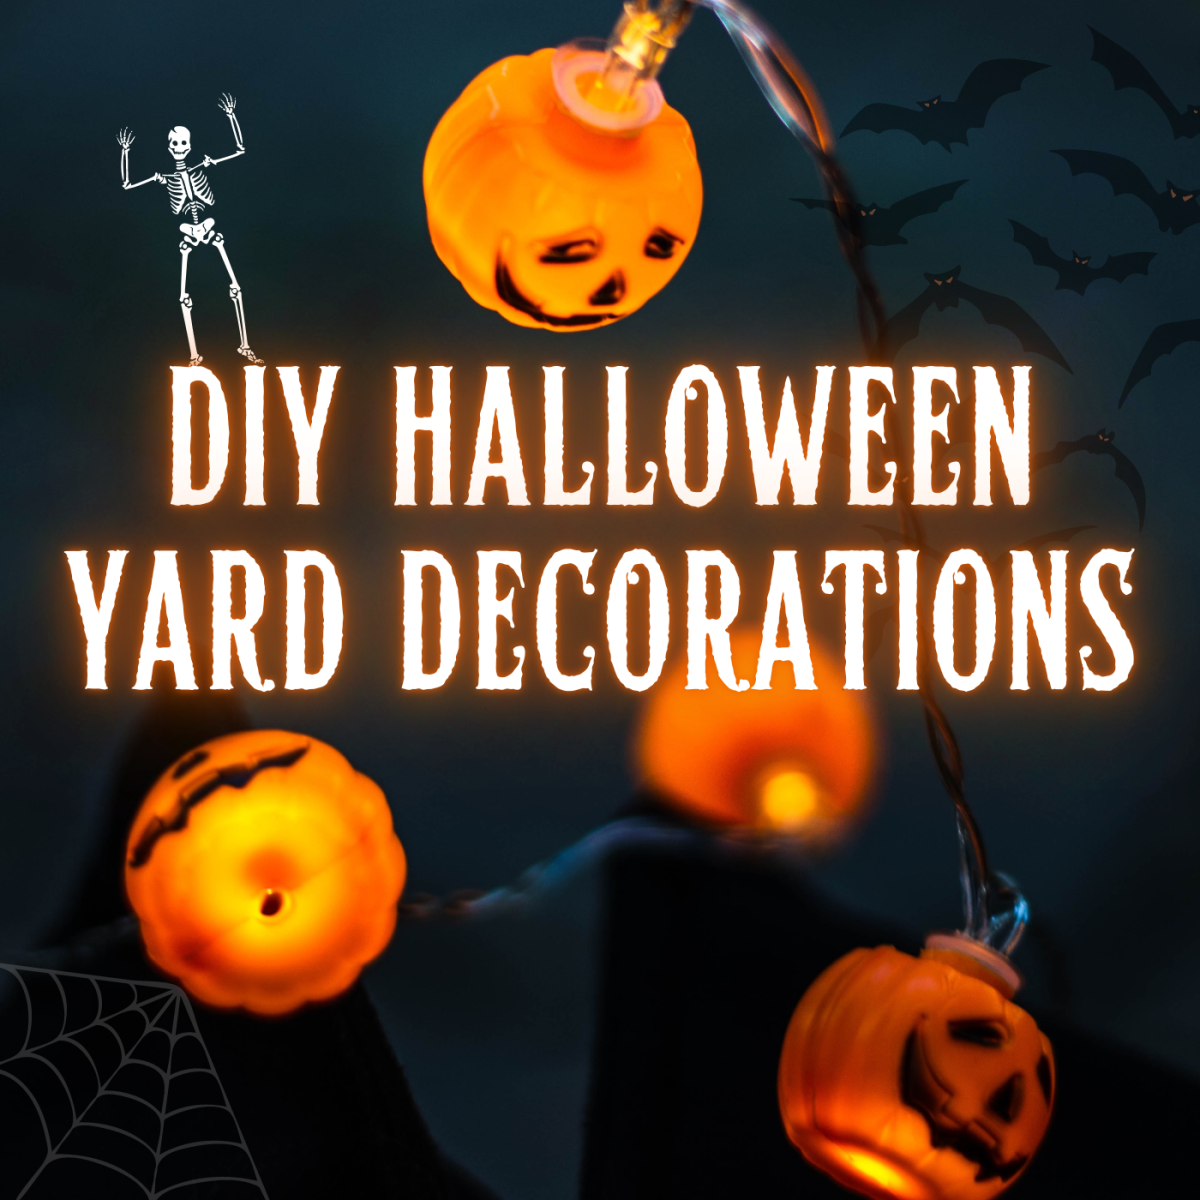 Make your yard, garden or porch the spookiest one on the block with these DIY ideas!